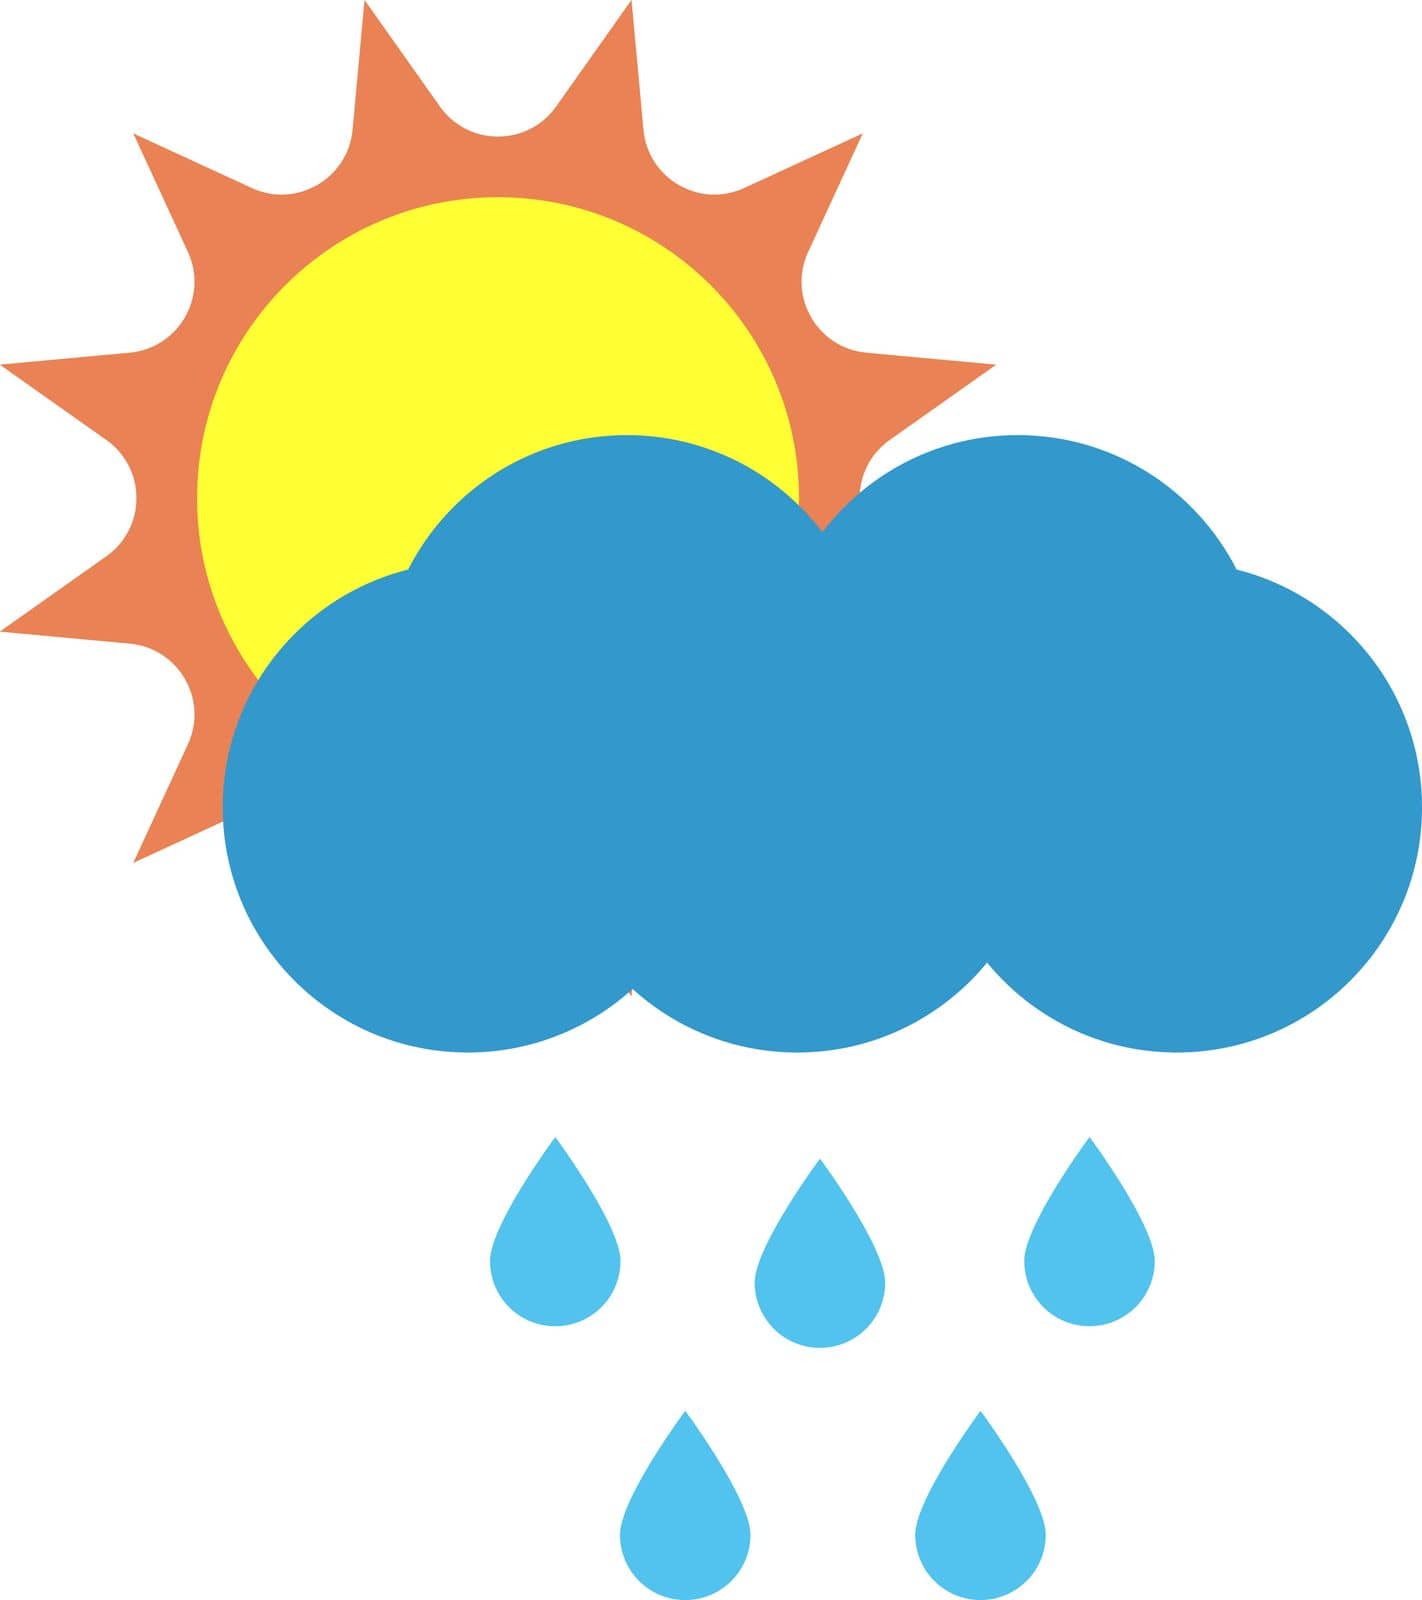 Rain and sun, vector. Blue clouds and raindrops with the sun in the background.